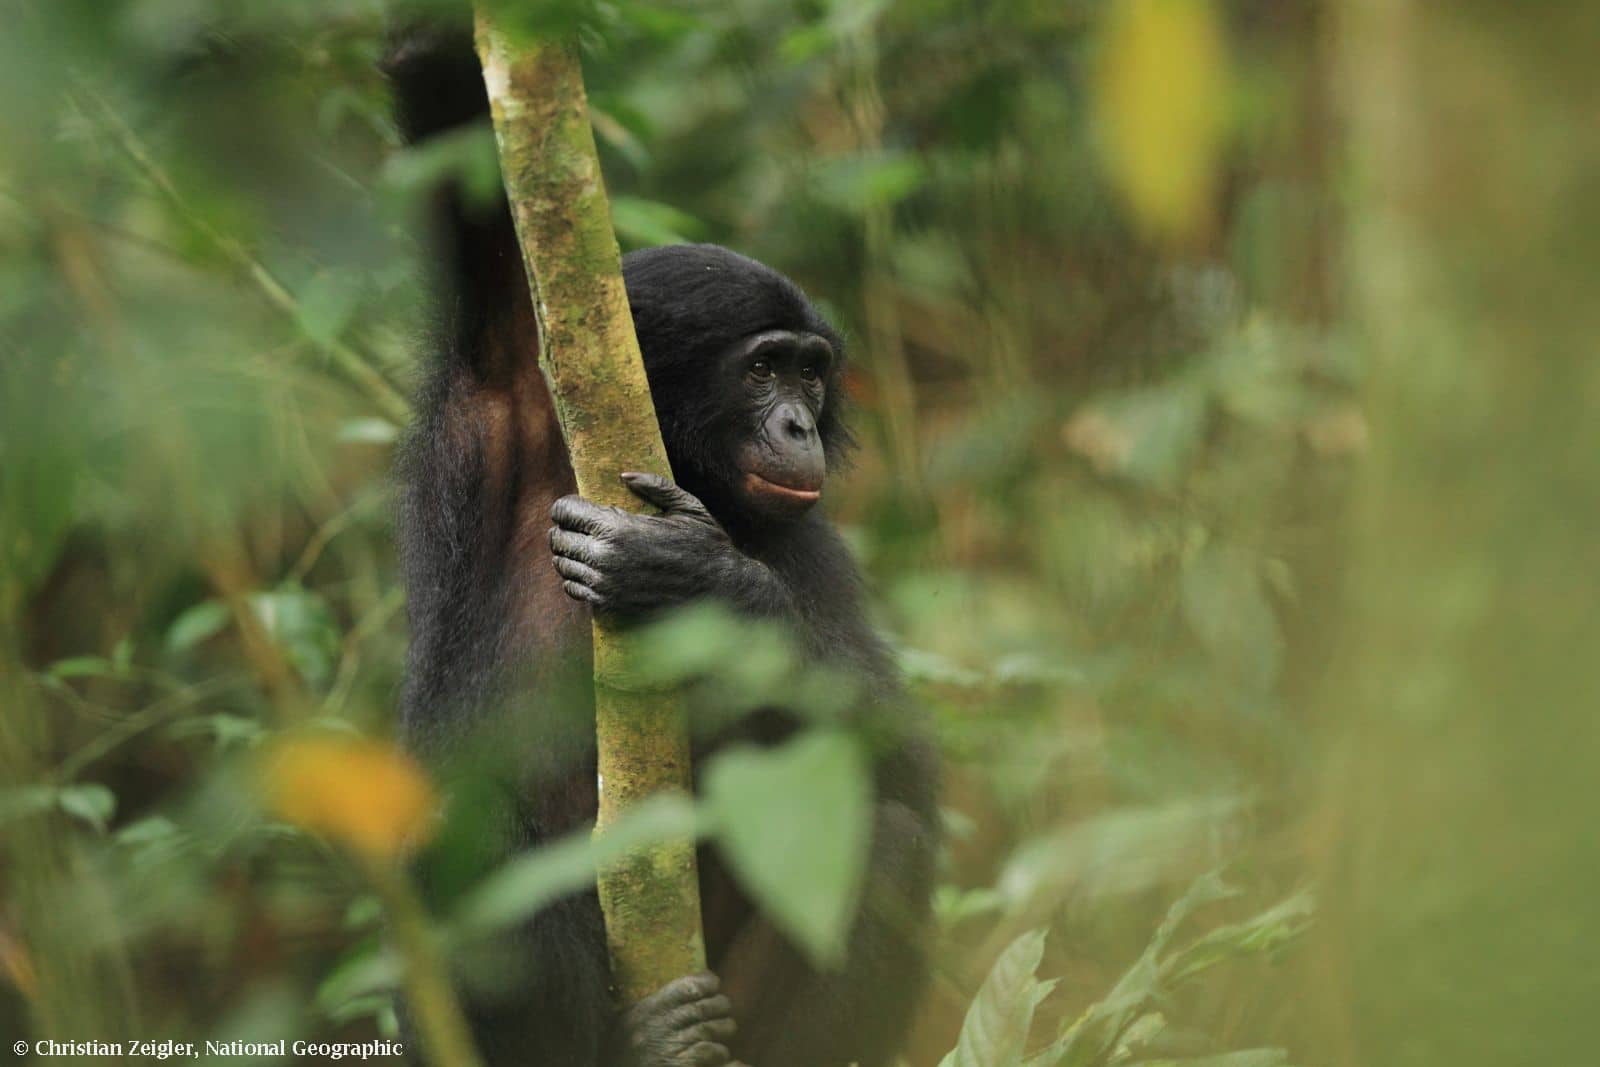 Endangered species - A Bonobo in tree, image by Christian Ziegler, National Geographic